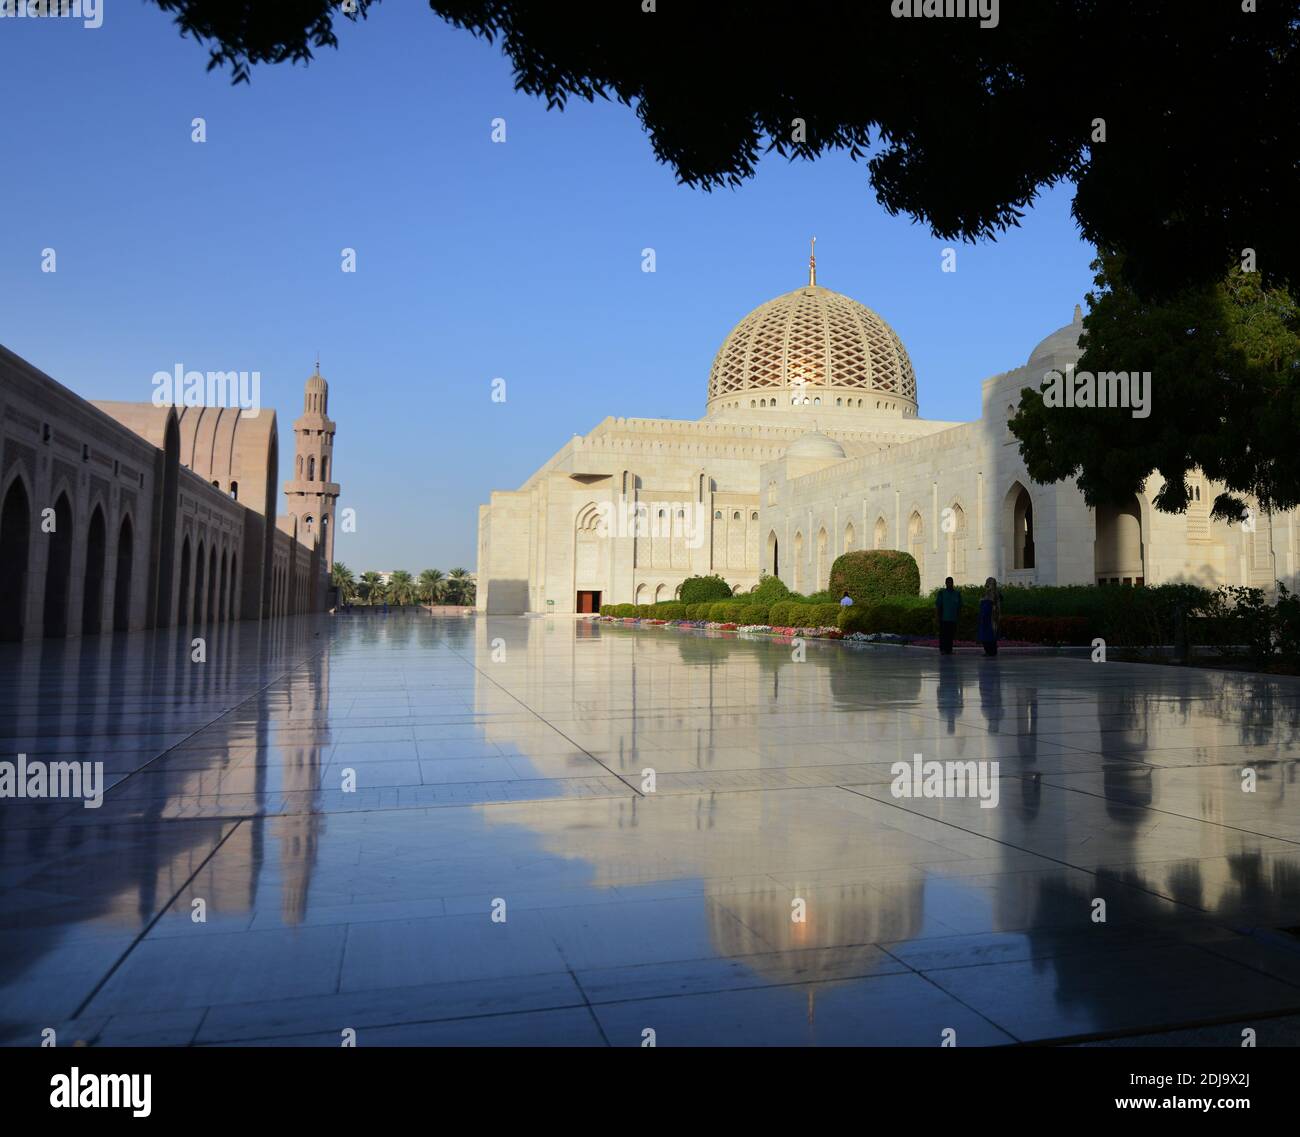 The Sultan Qaboos Grand mosque in Muscat, Oman. Stock Photo